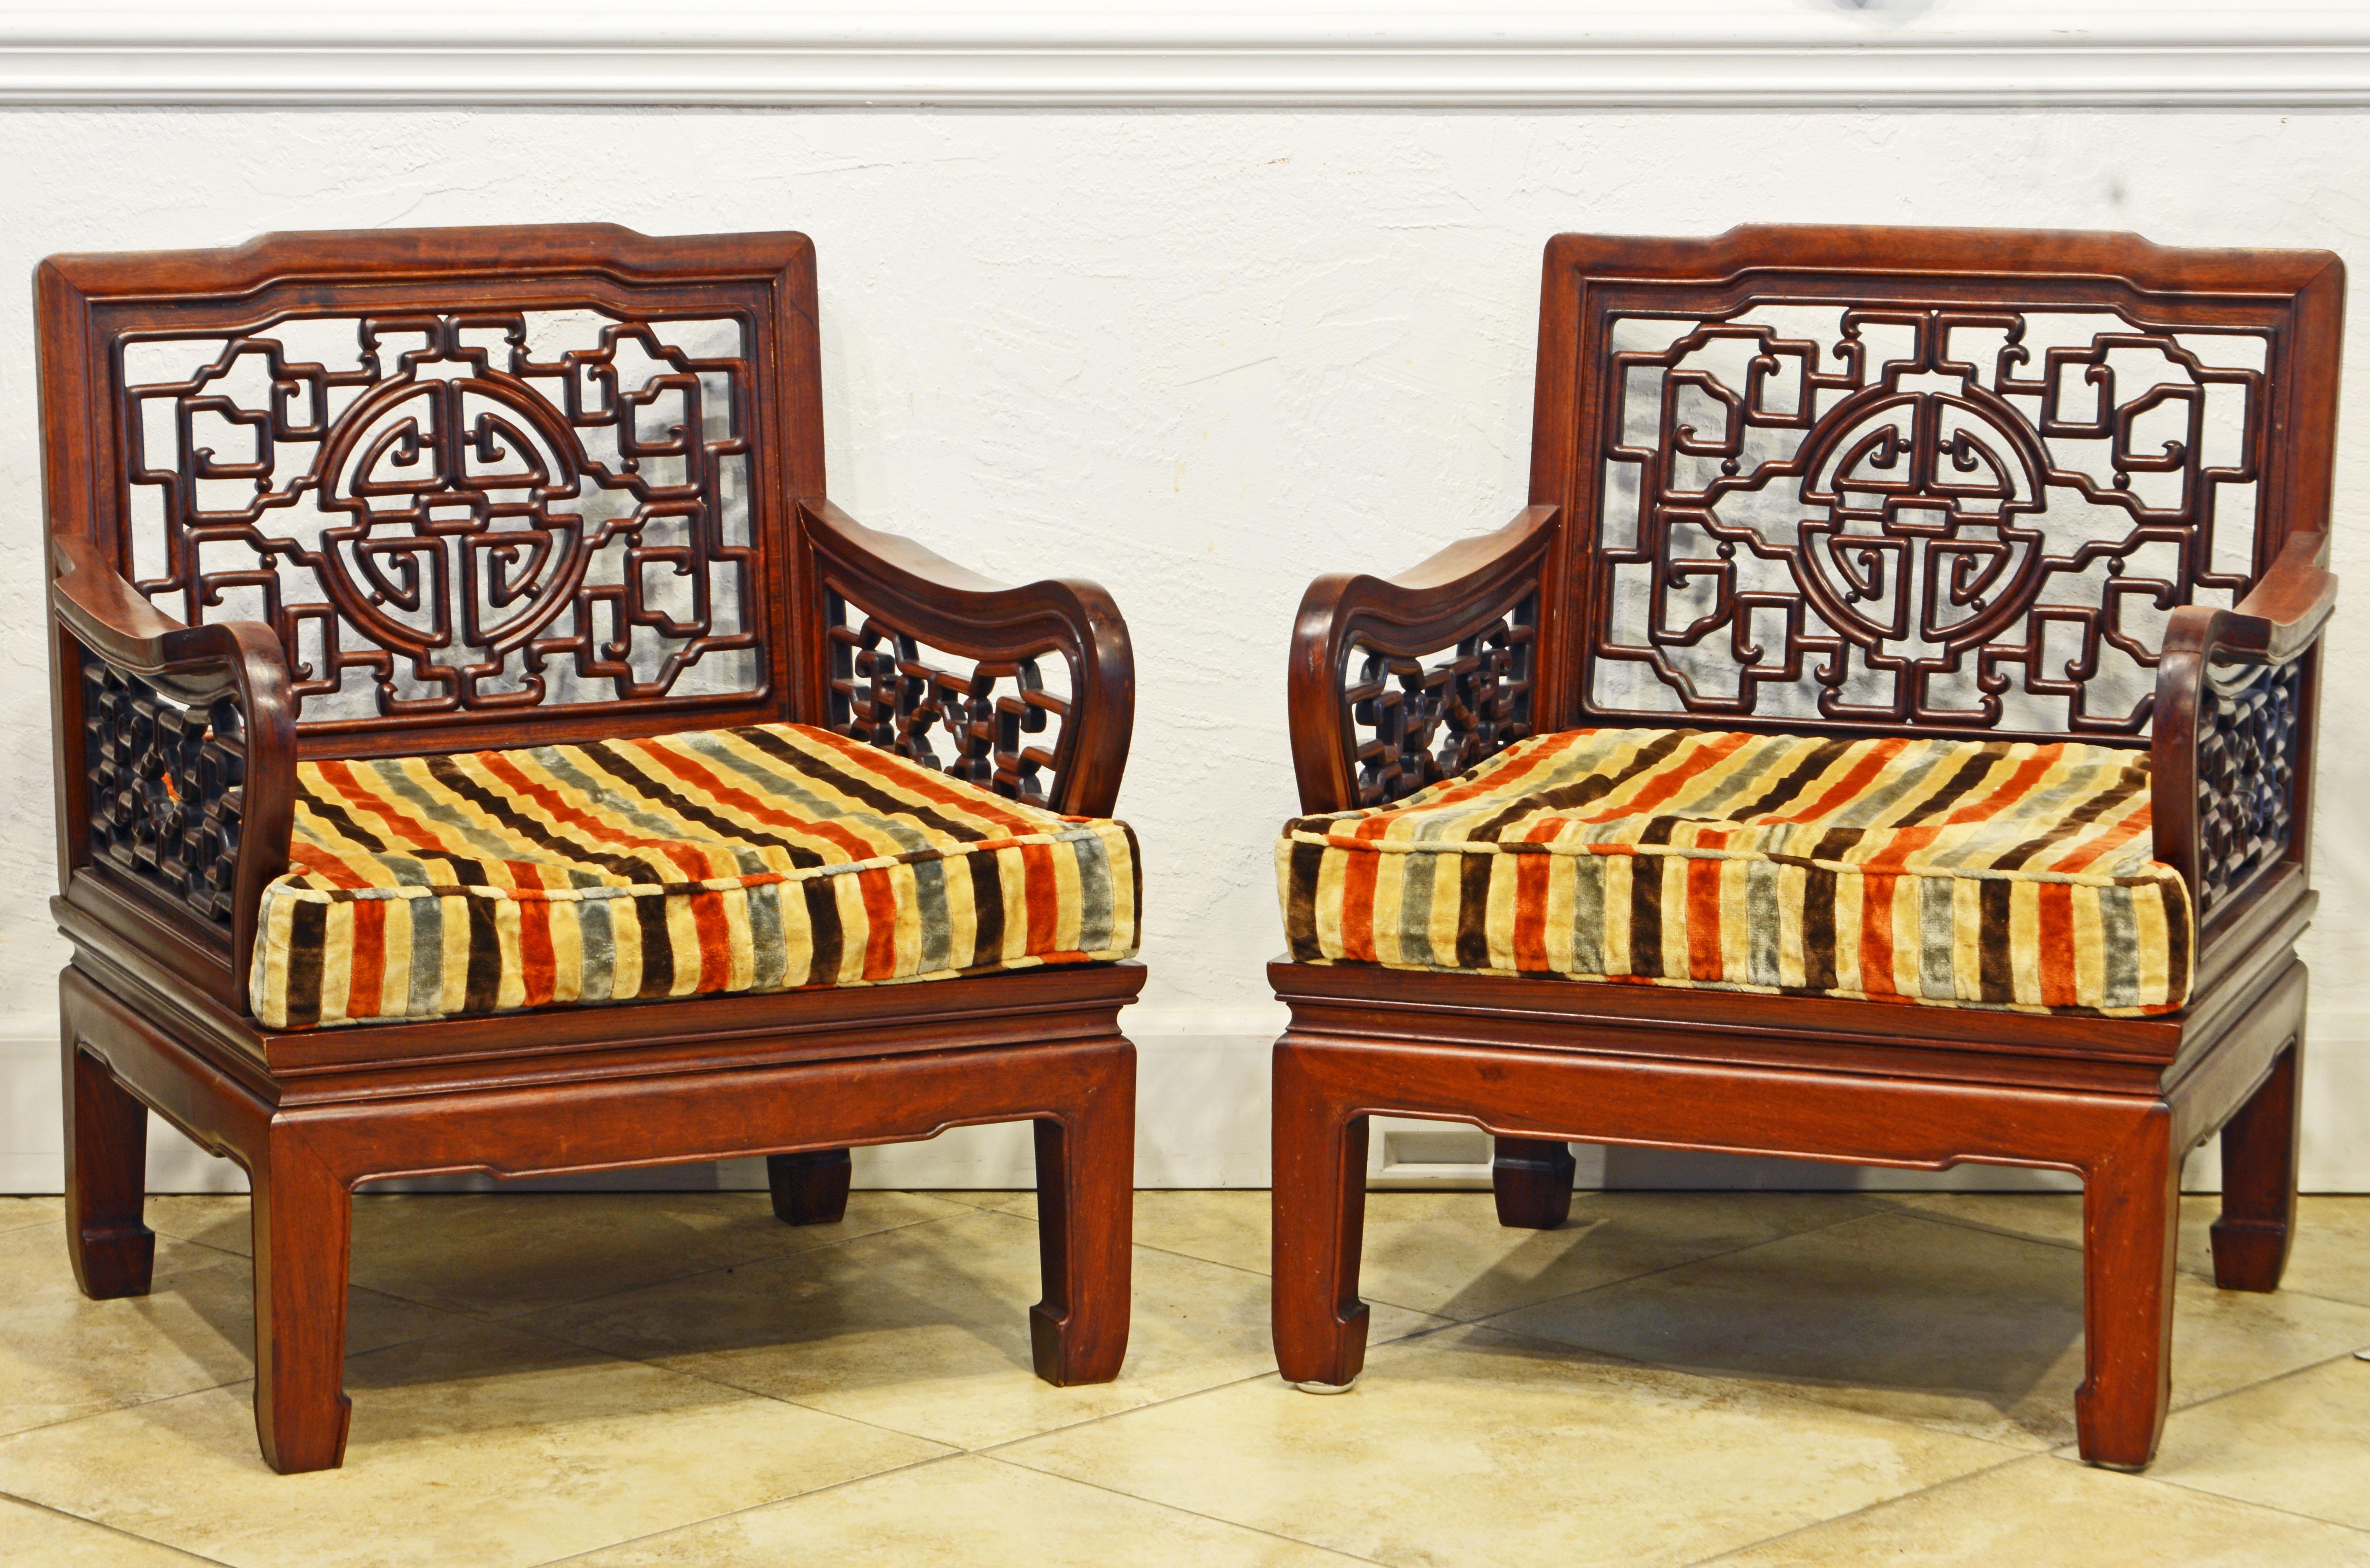 An inviting pair of colonial style carved mahogany club or lounge chairs with cushions dating to the mid-20th century and most likely made in Hong. Kong. The chairs which are reminiscent of Ming furniture feature backrests and arm rests with